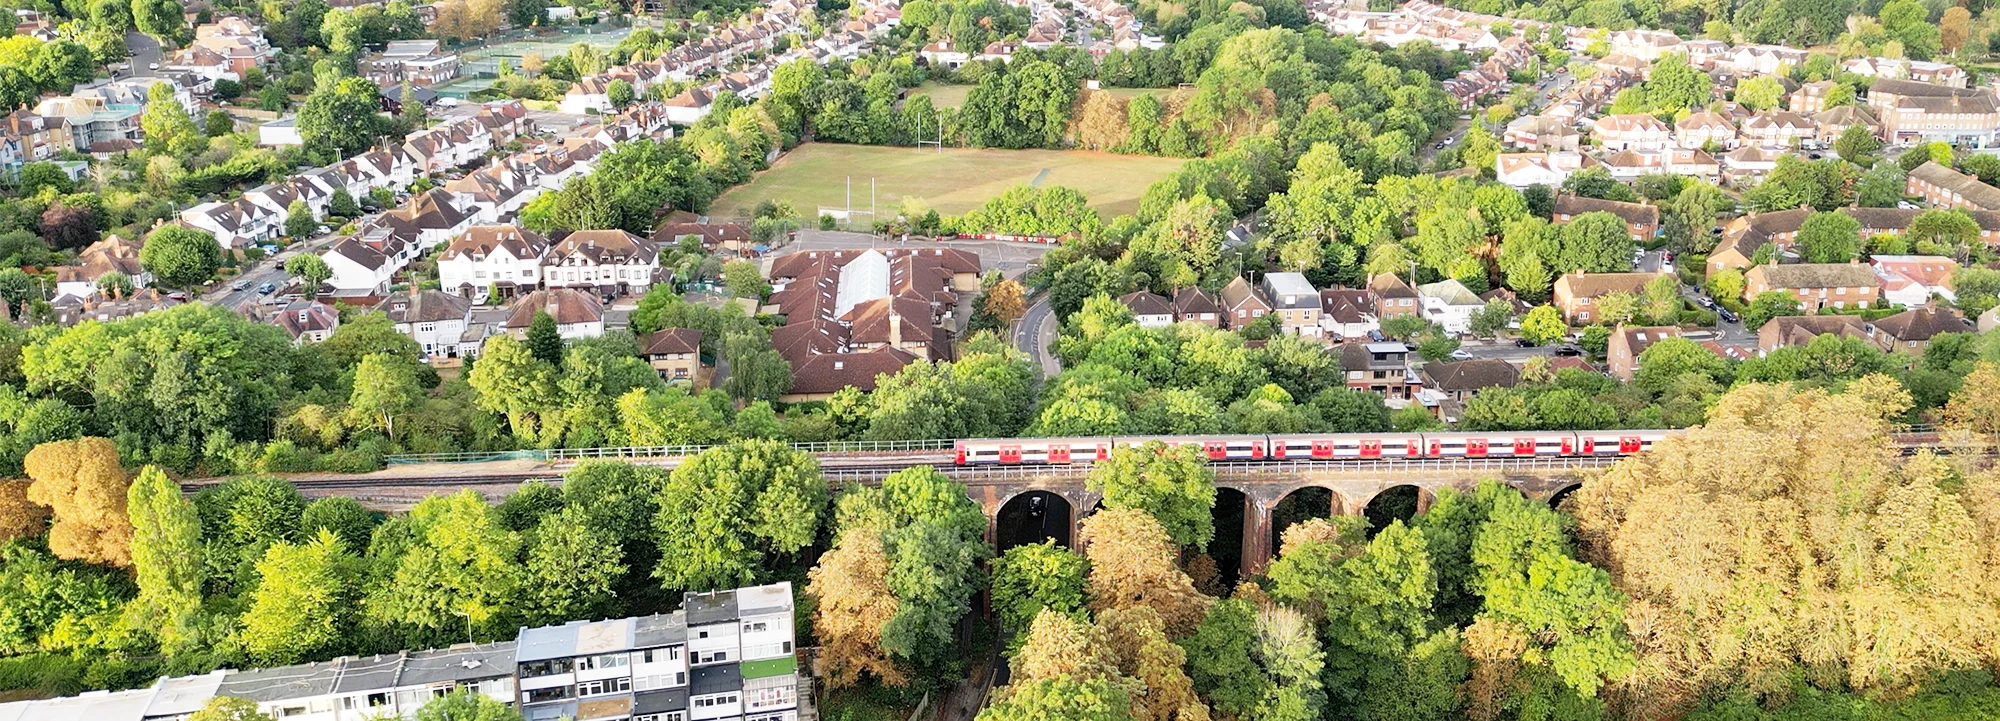 A train crosses a viaduct in a suburban area of north London in the daytime